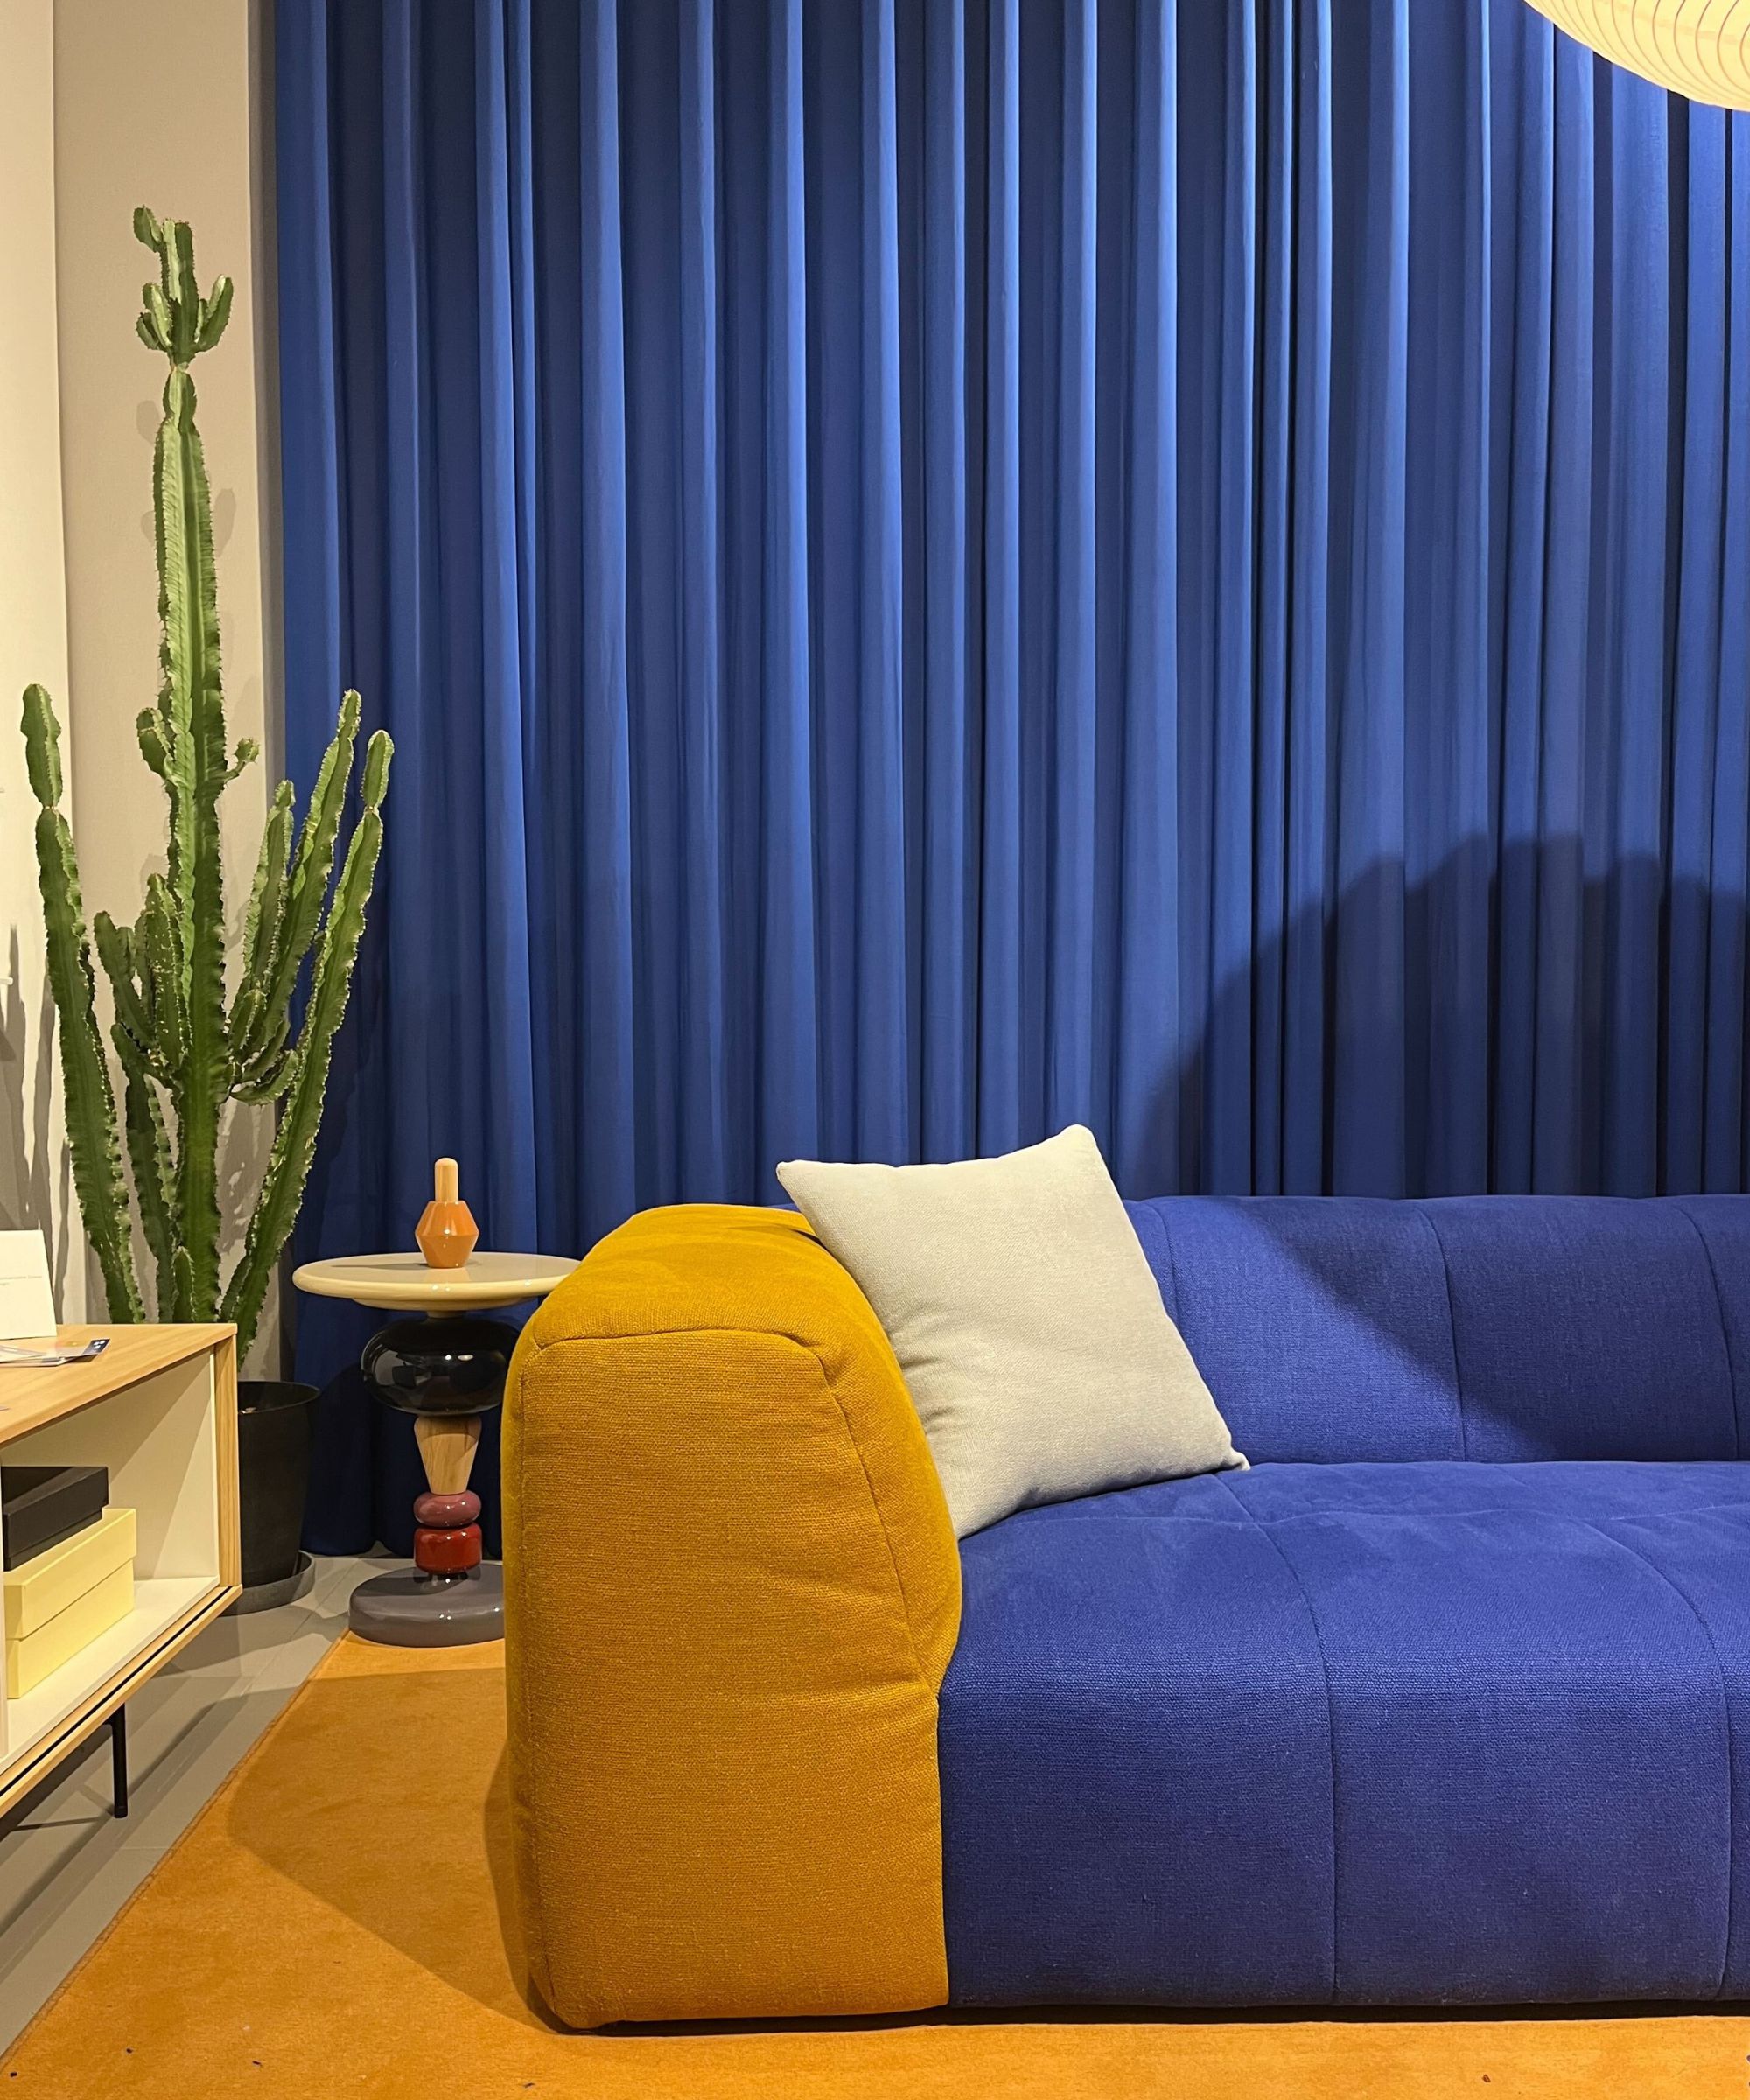 Blue and yellow sofa, blue curtains in background